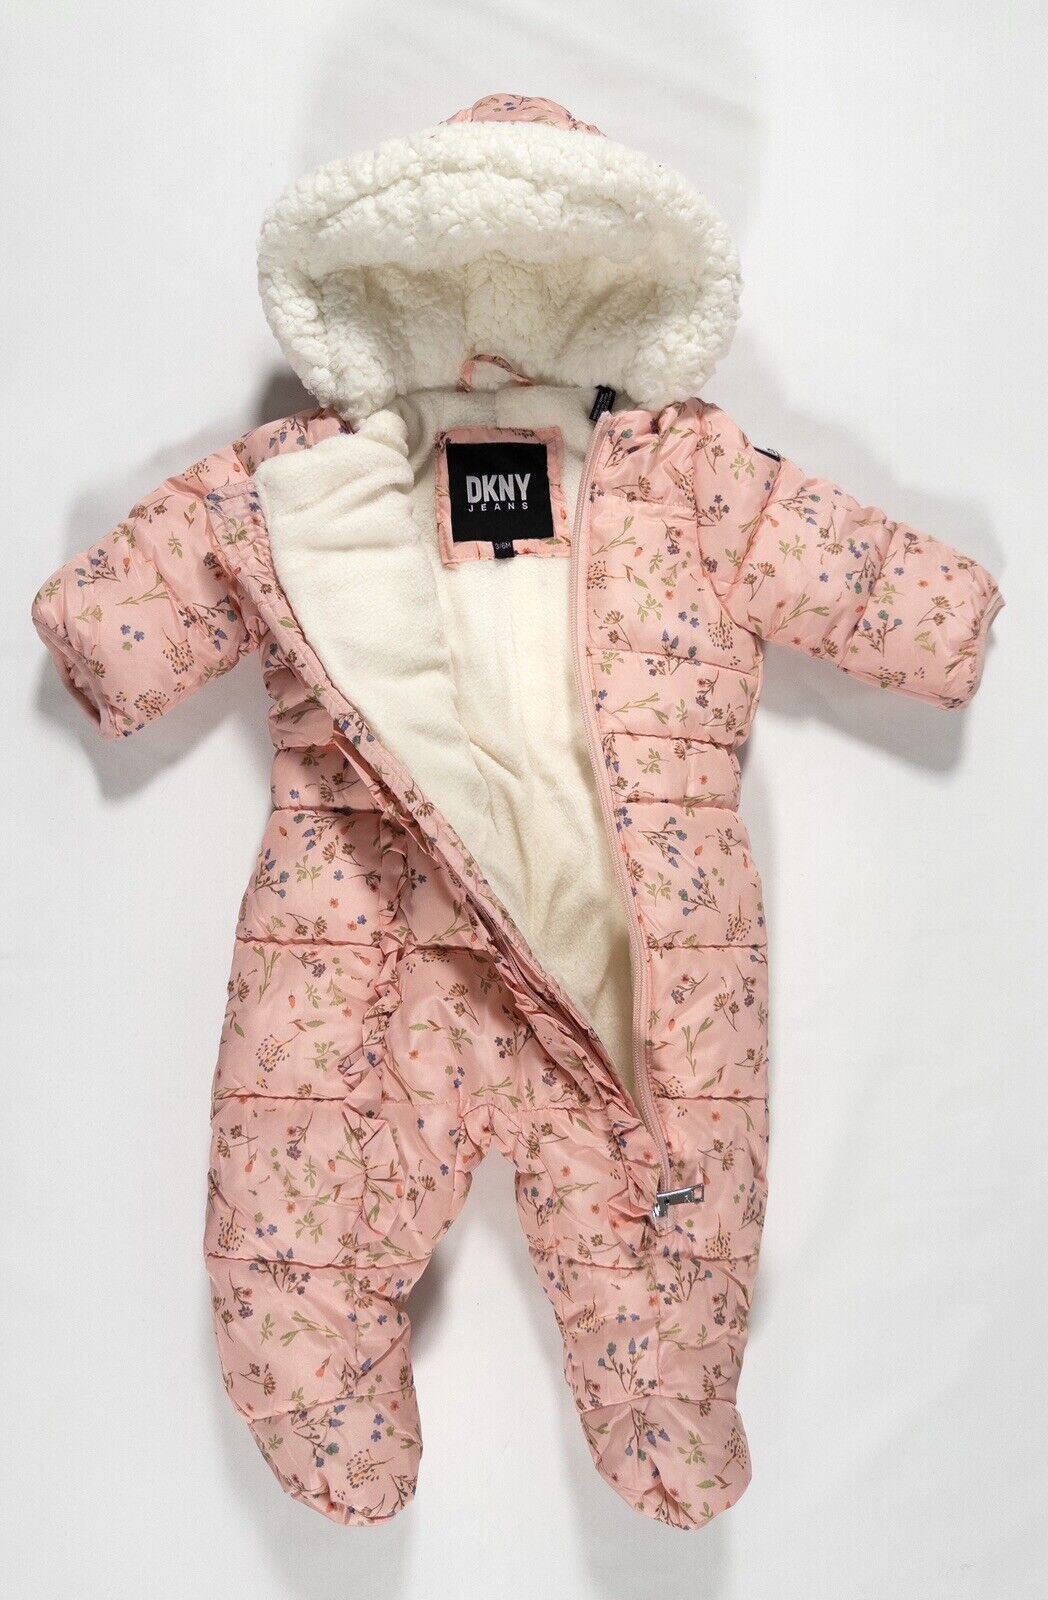 DKNY JEANS Baby Girl Pink Floral Snowsuit All in one Size UK 3-6 Months